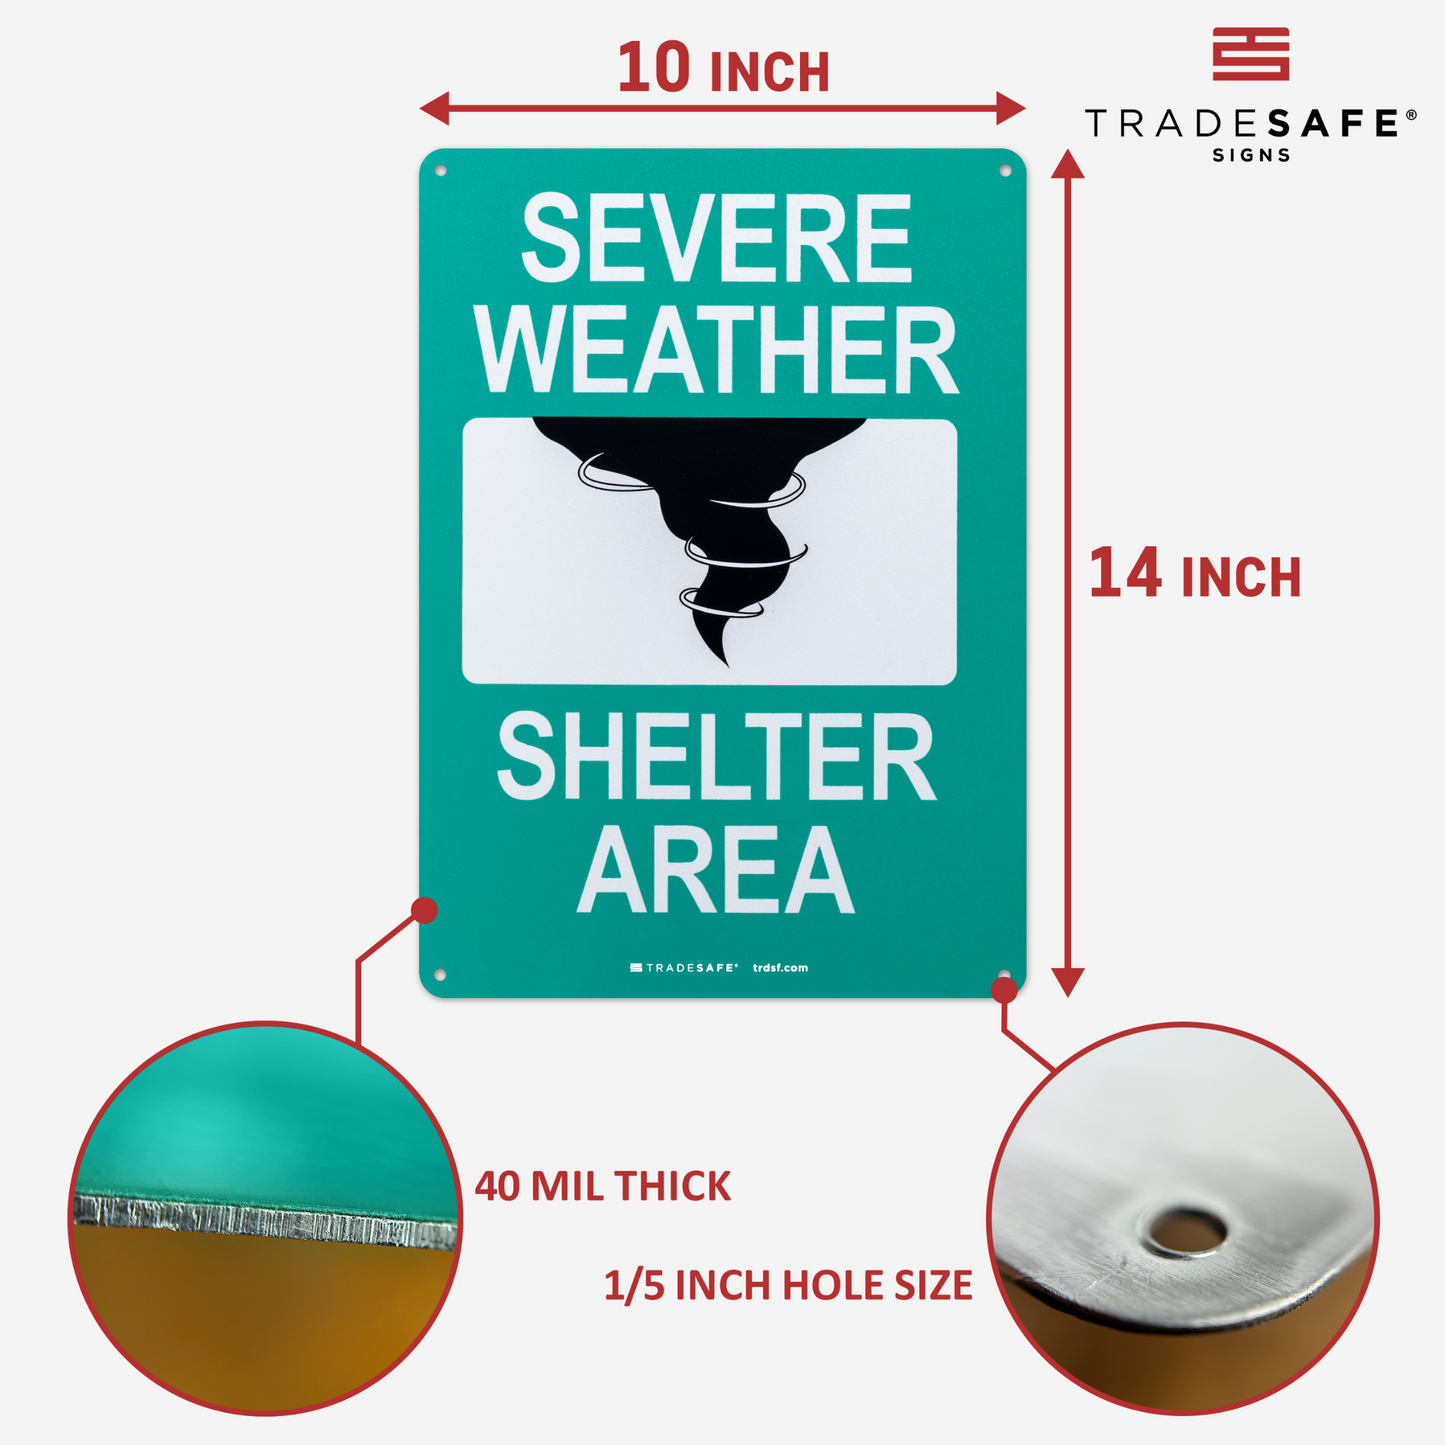 dimensions of severe weather shelter area sign